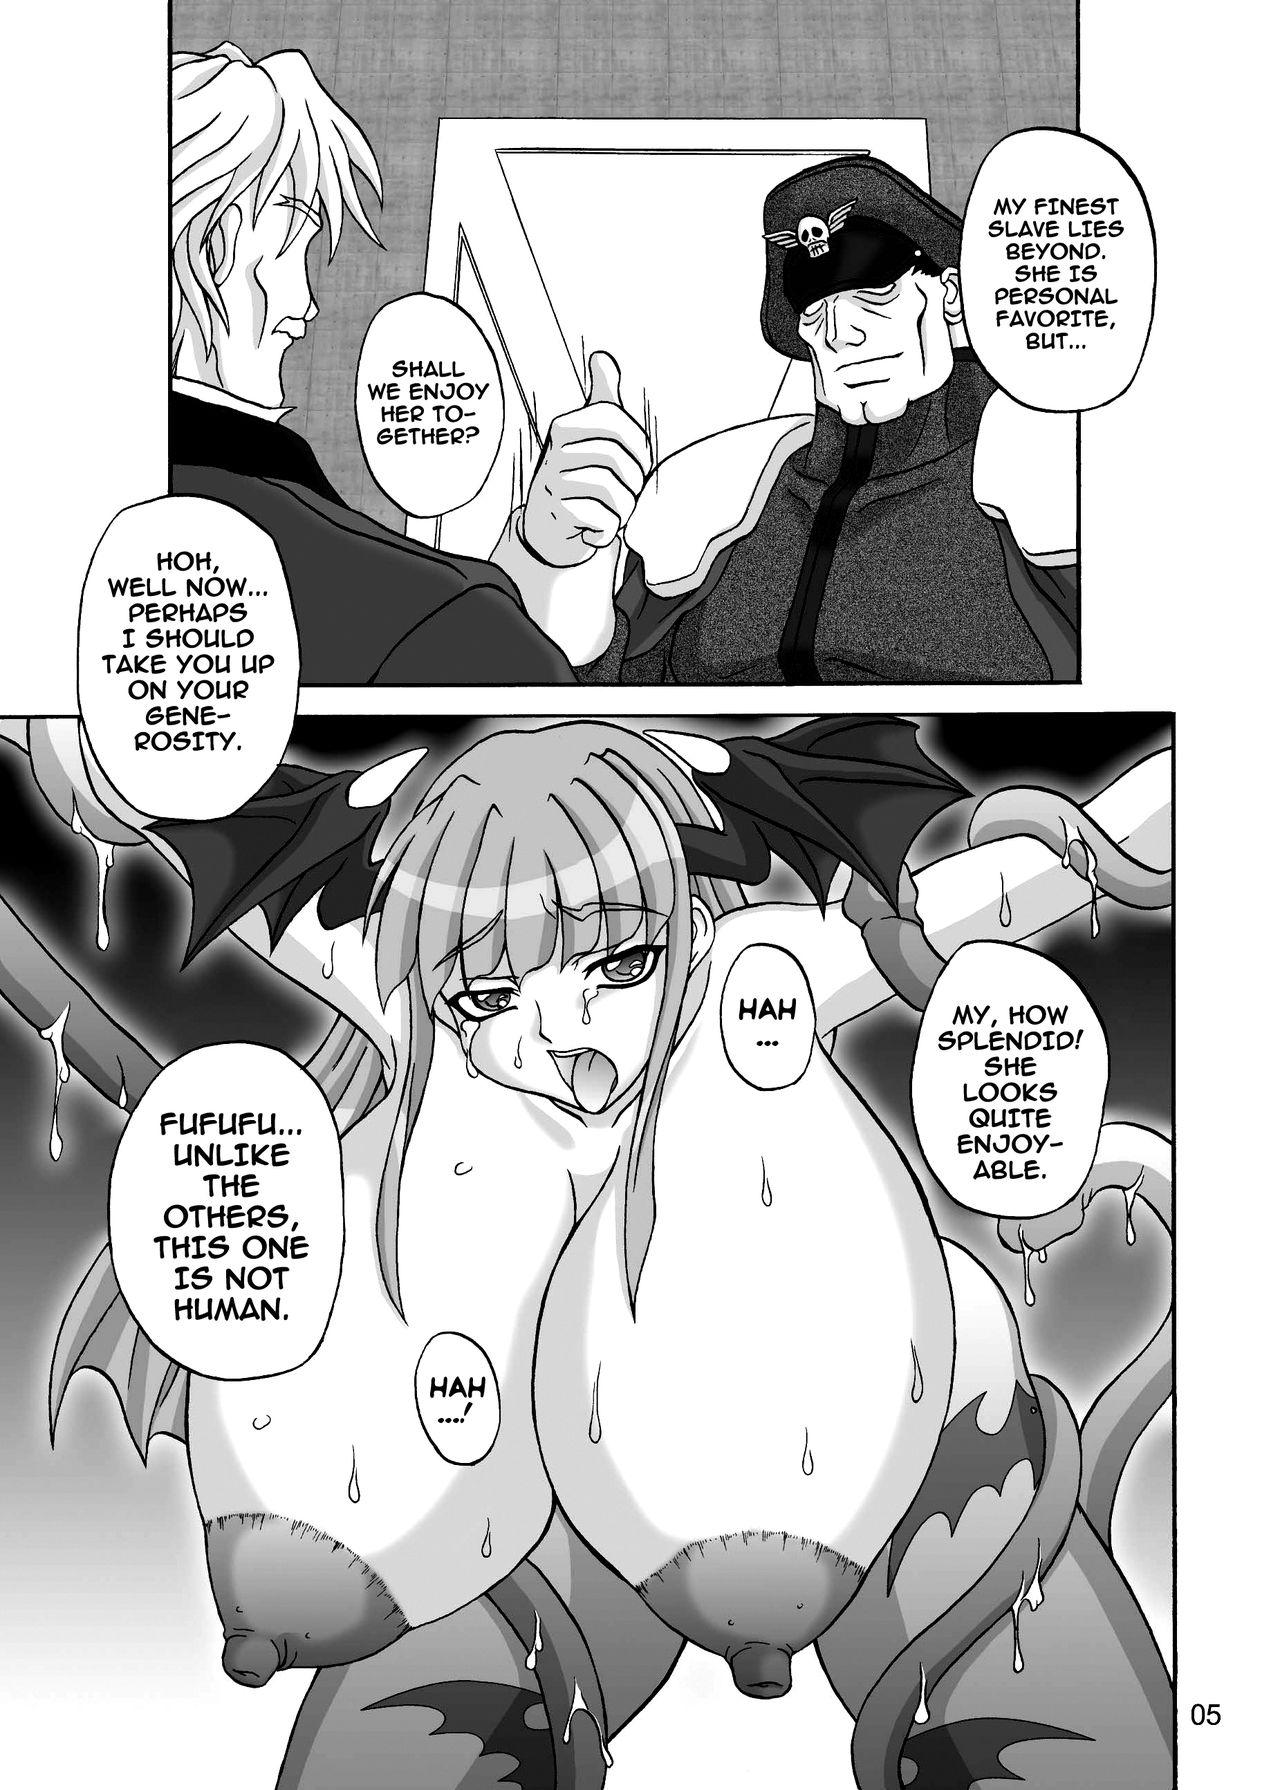 Jeune Mec Insanity 2 - King of fighters Darkstalkers Transexual - Page 4